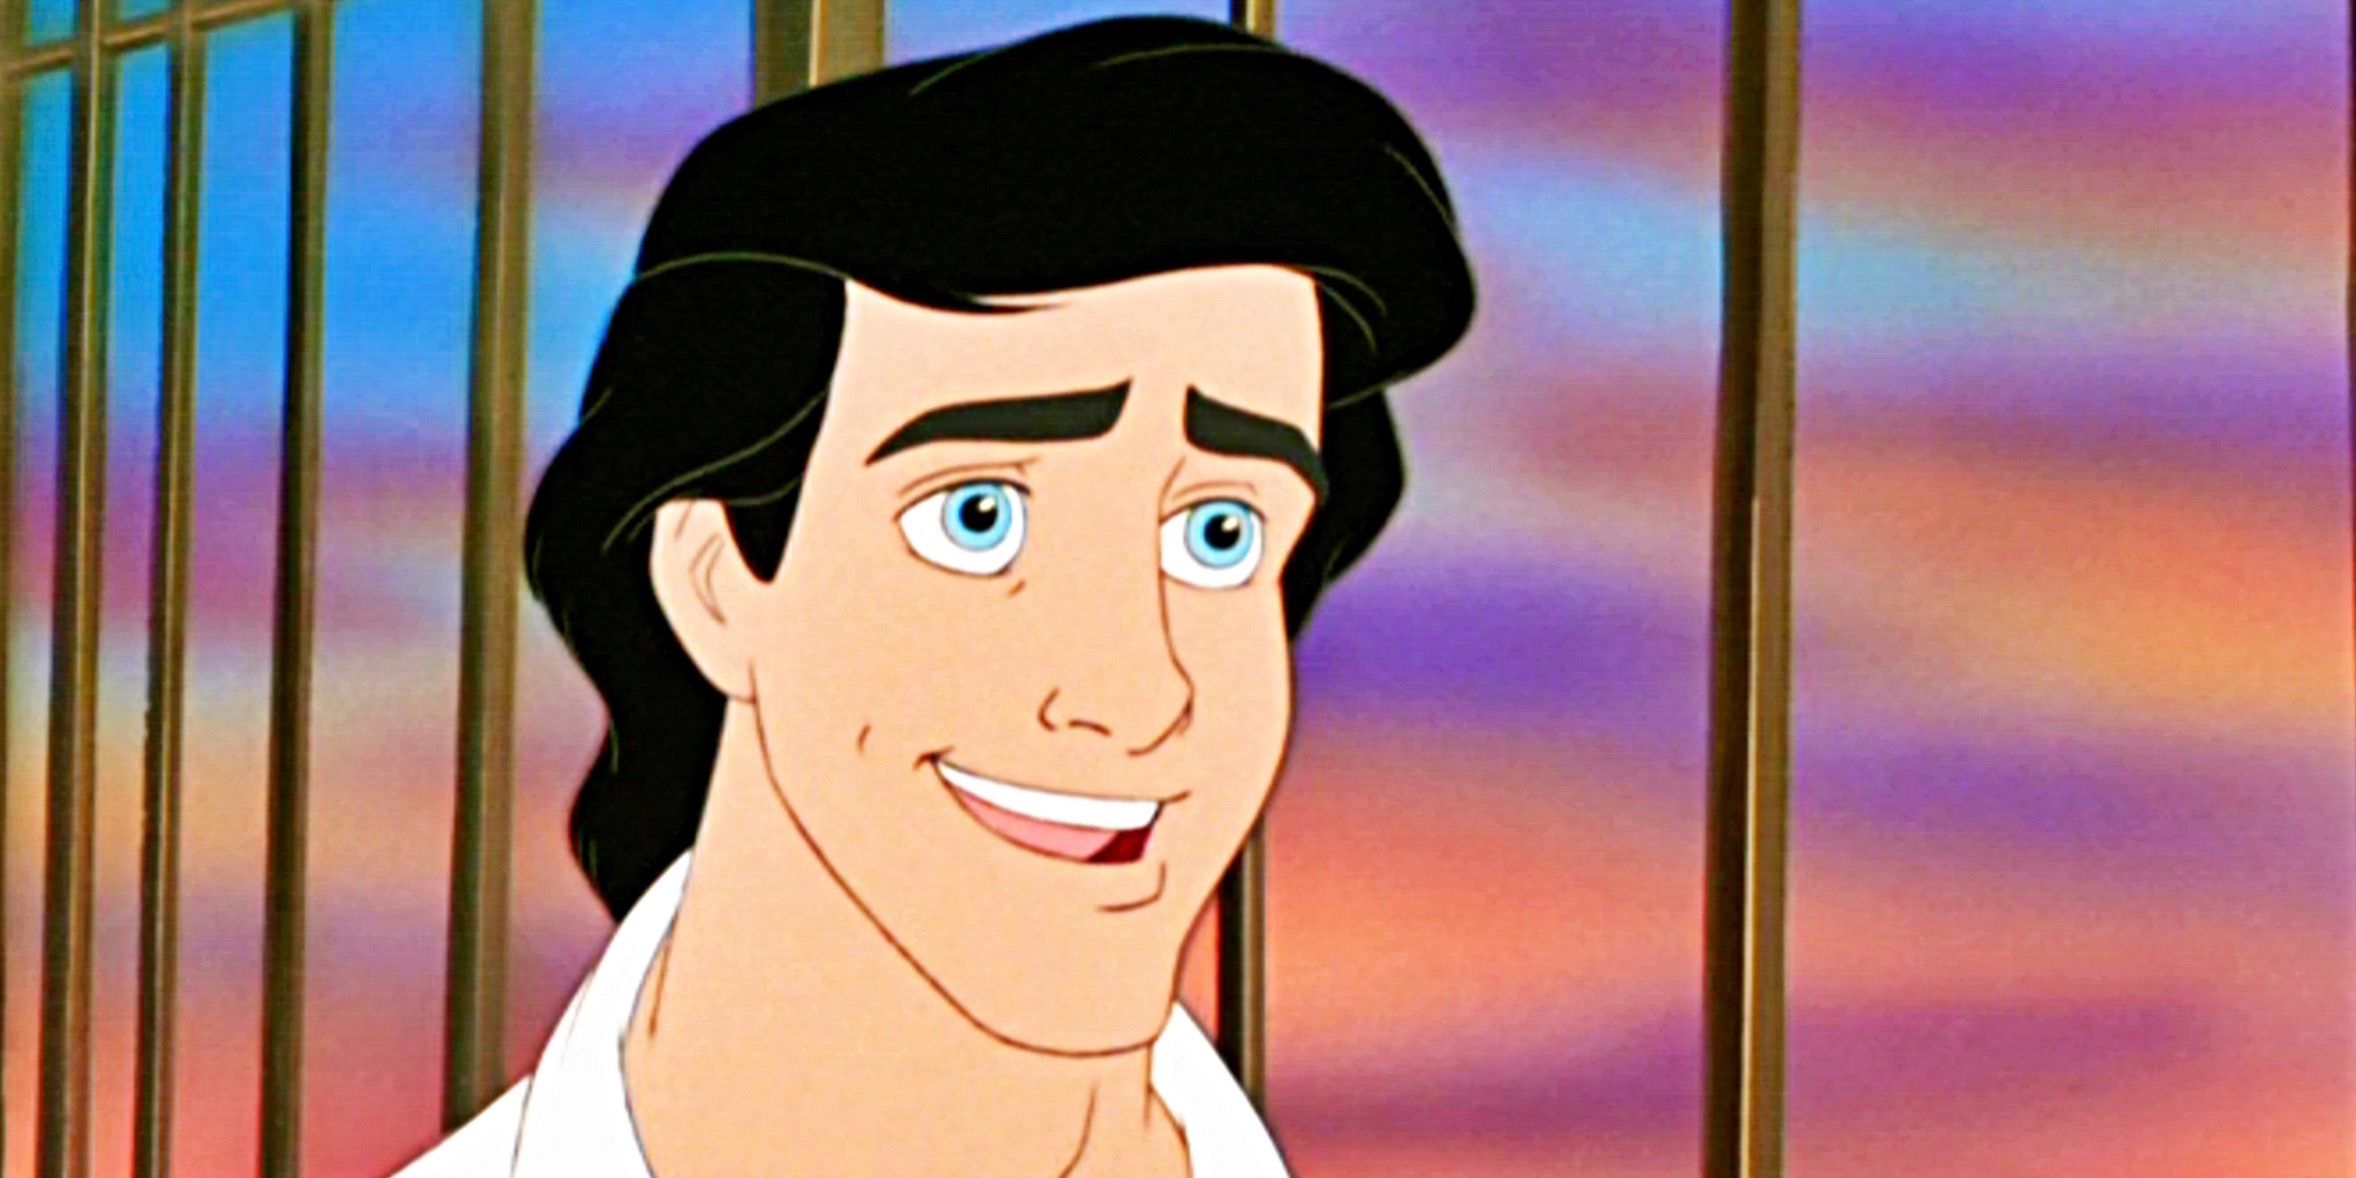 Prince Eric smiling while at sea in The Little Mermaid animated movie